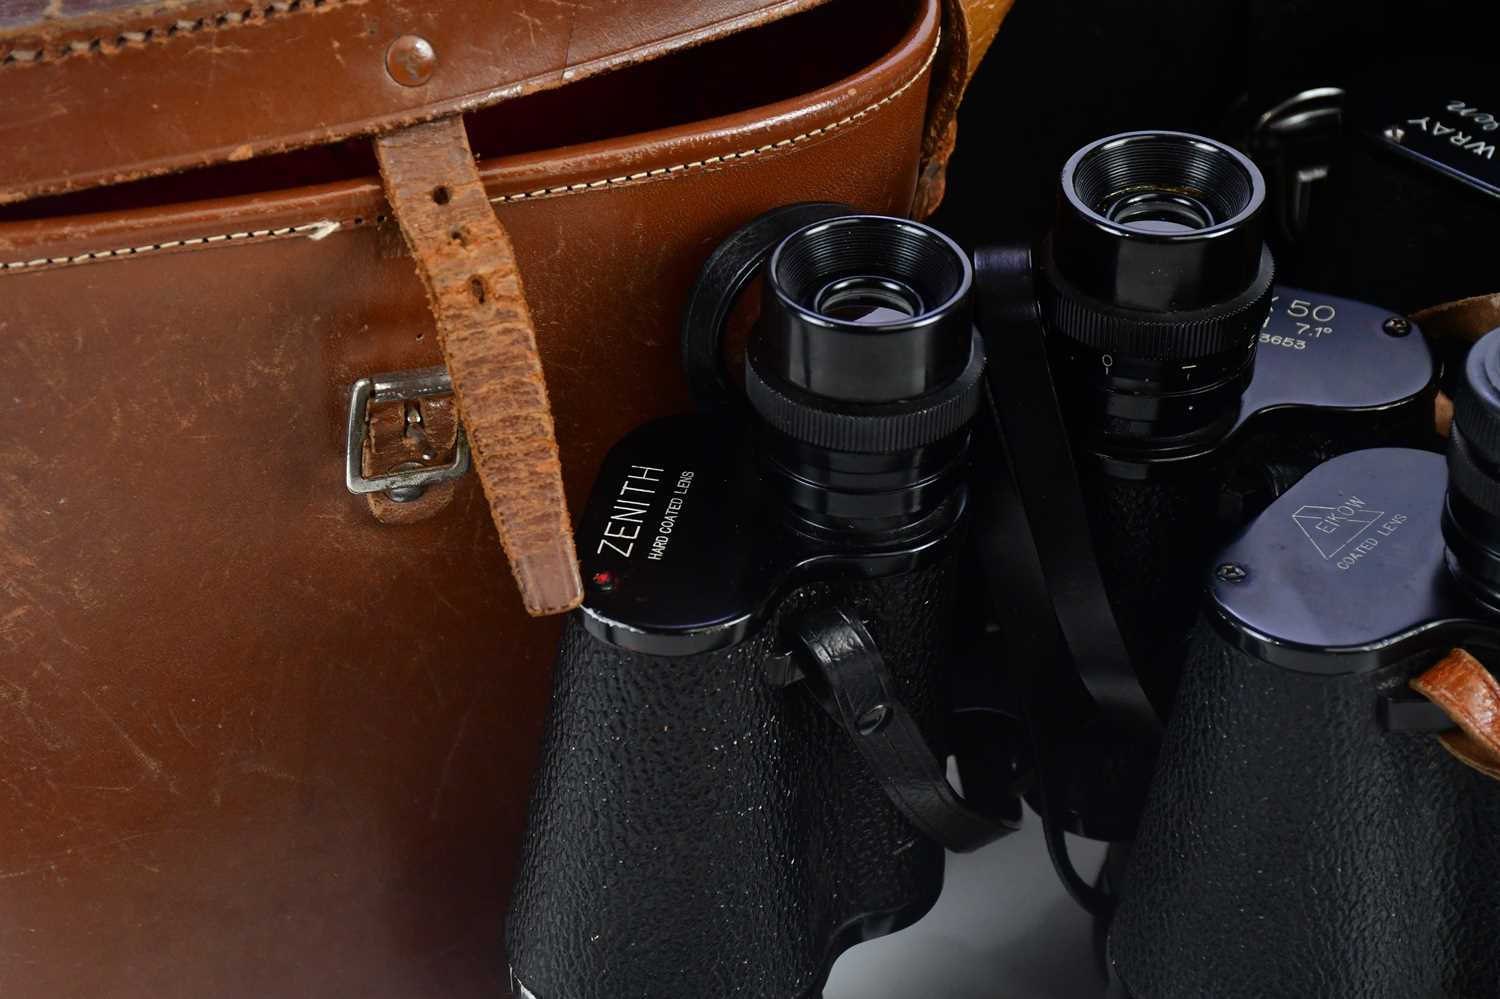 ROSS OF LONDON; a pair of 7x50 binoculars, number 23188, in leather case, with six other pairs of - Image 2 of 3